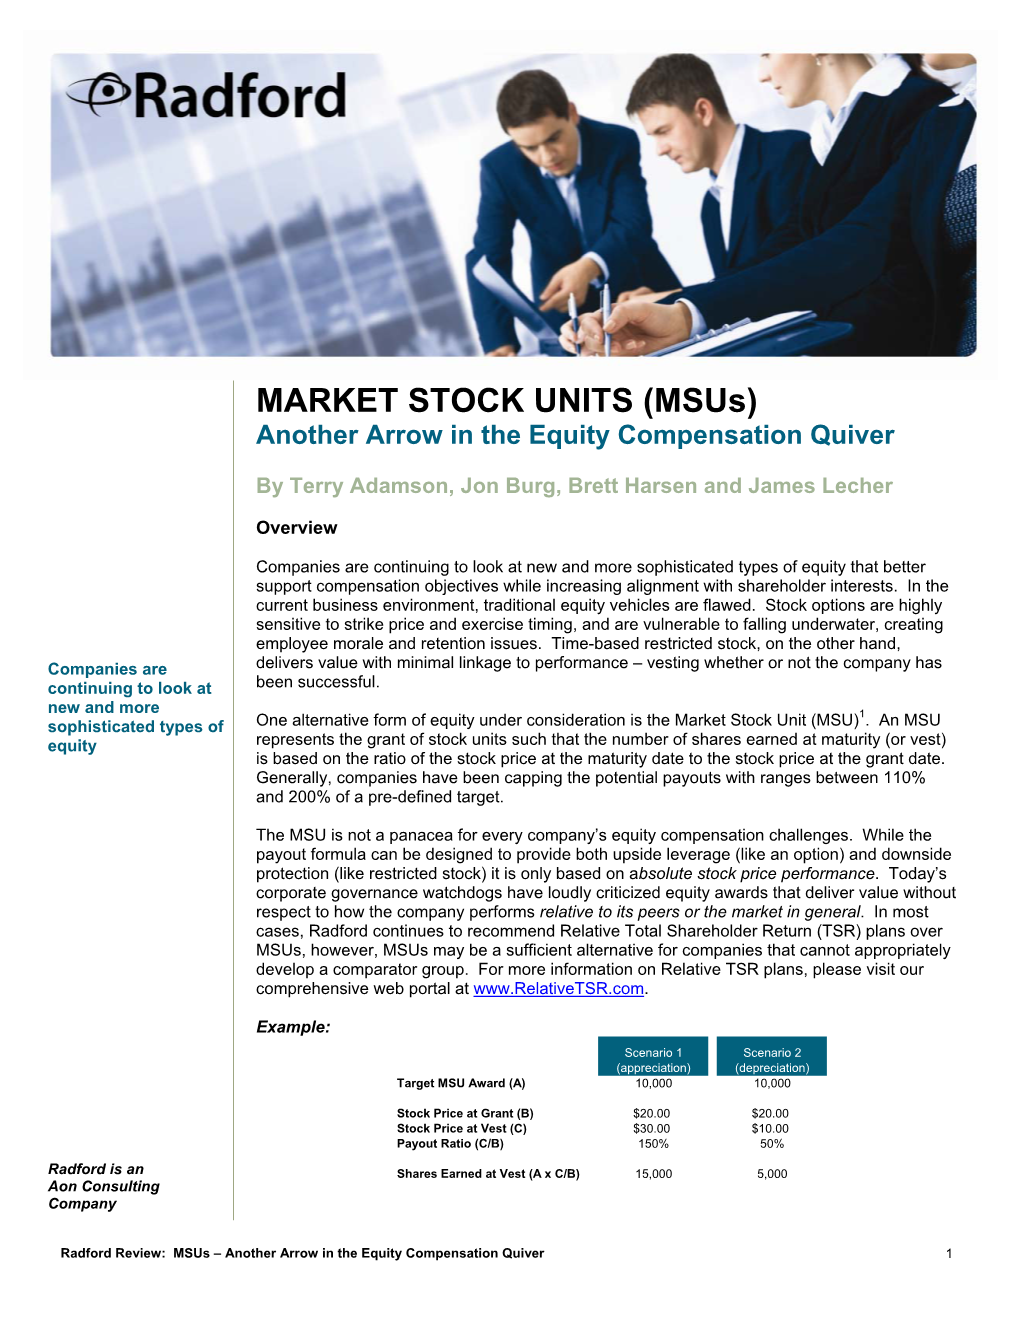 MARKET STOCK UNITS (Msus) Another Arrow in the Equity Compensation Quiver